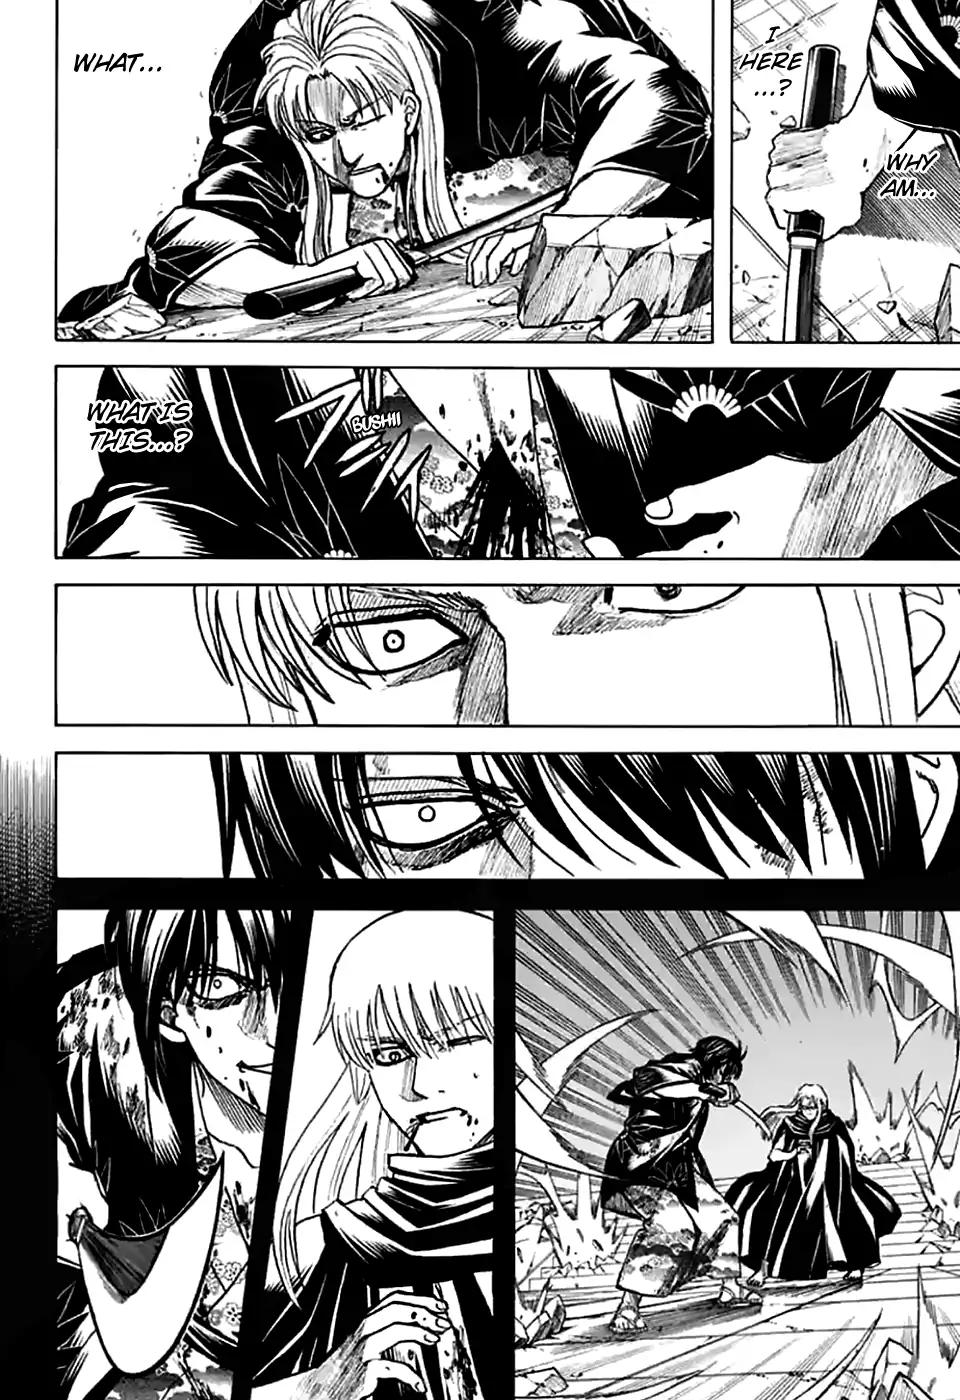 Gintama chapter 703 page 8